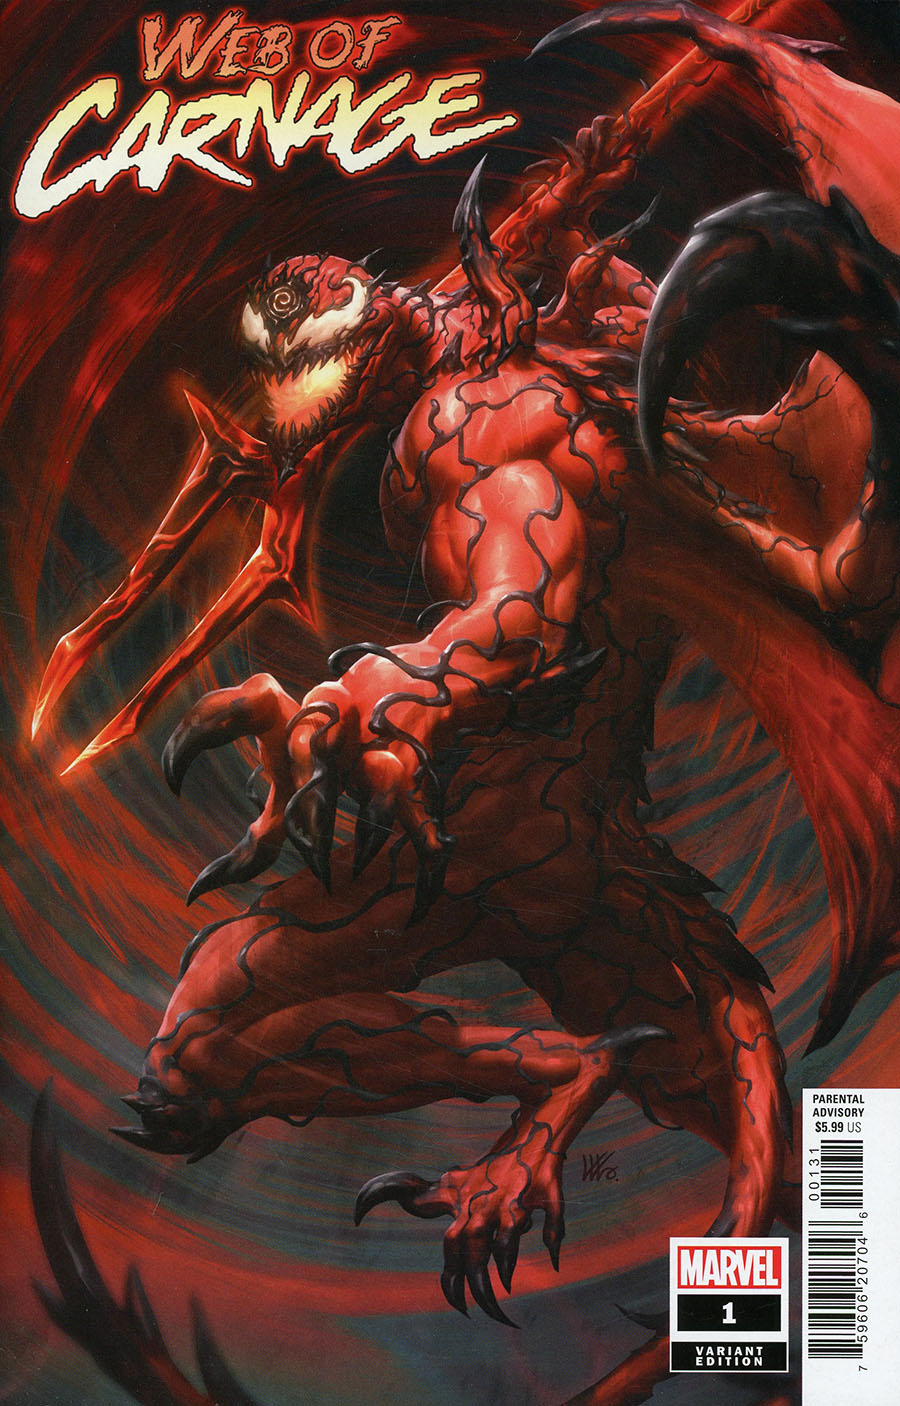 Web Of Carnage #1 Cover C Variant Kendrick kunkka Lim Cover